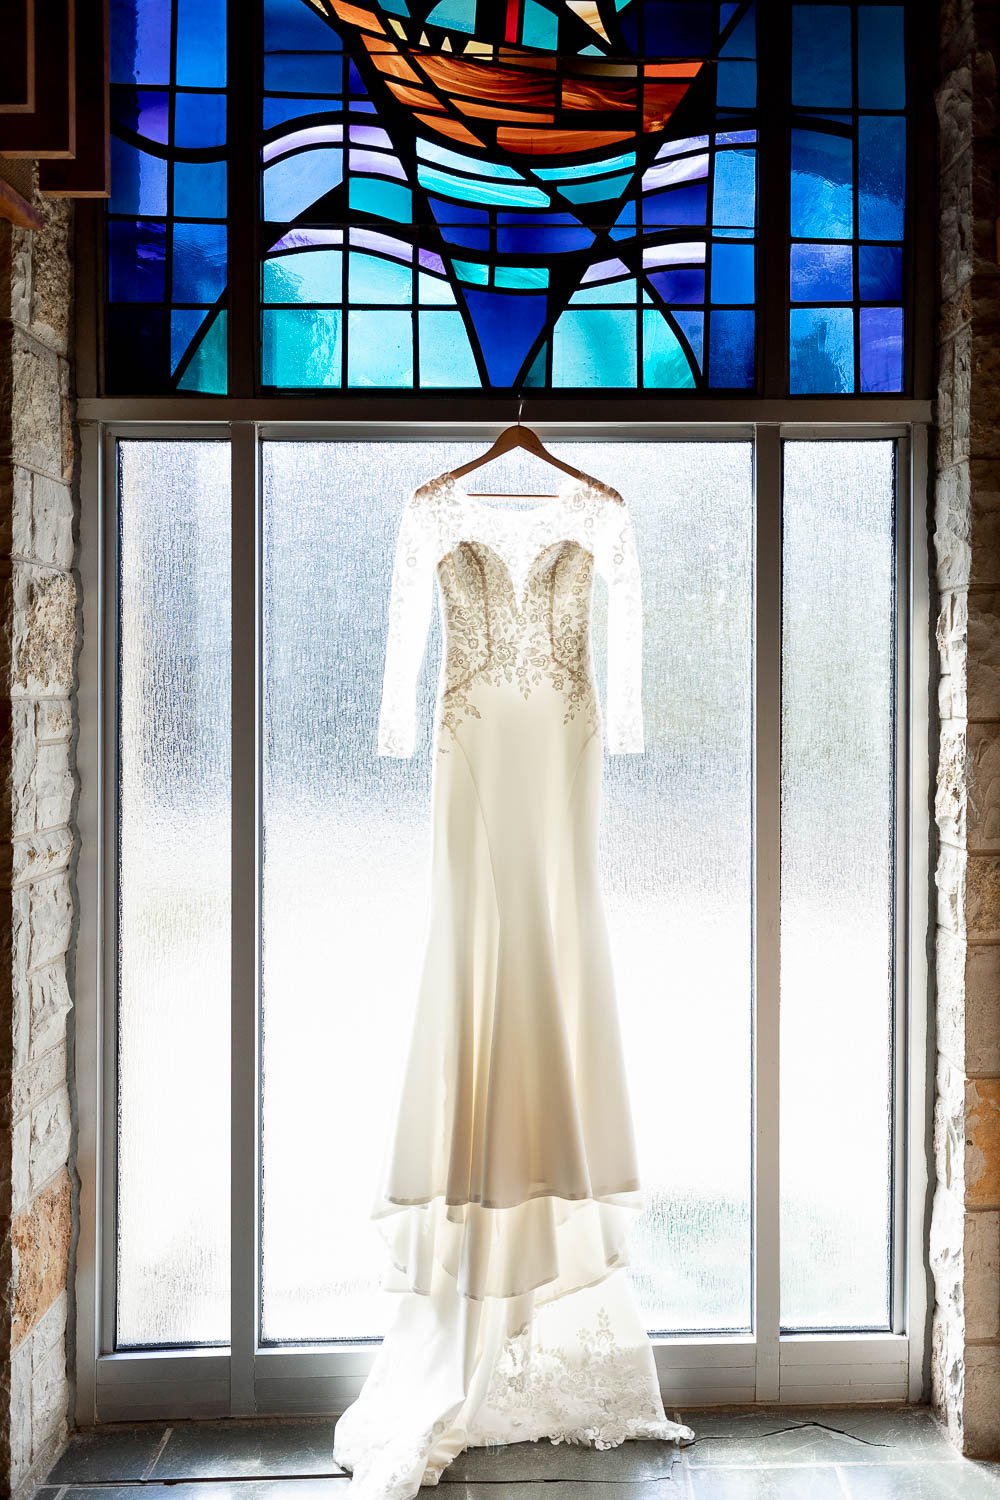 photo of wedding gown in catholic church